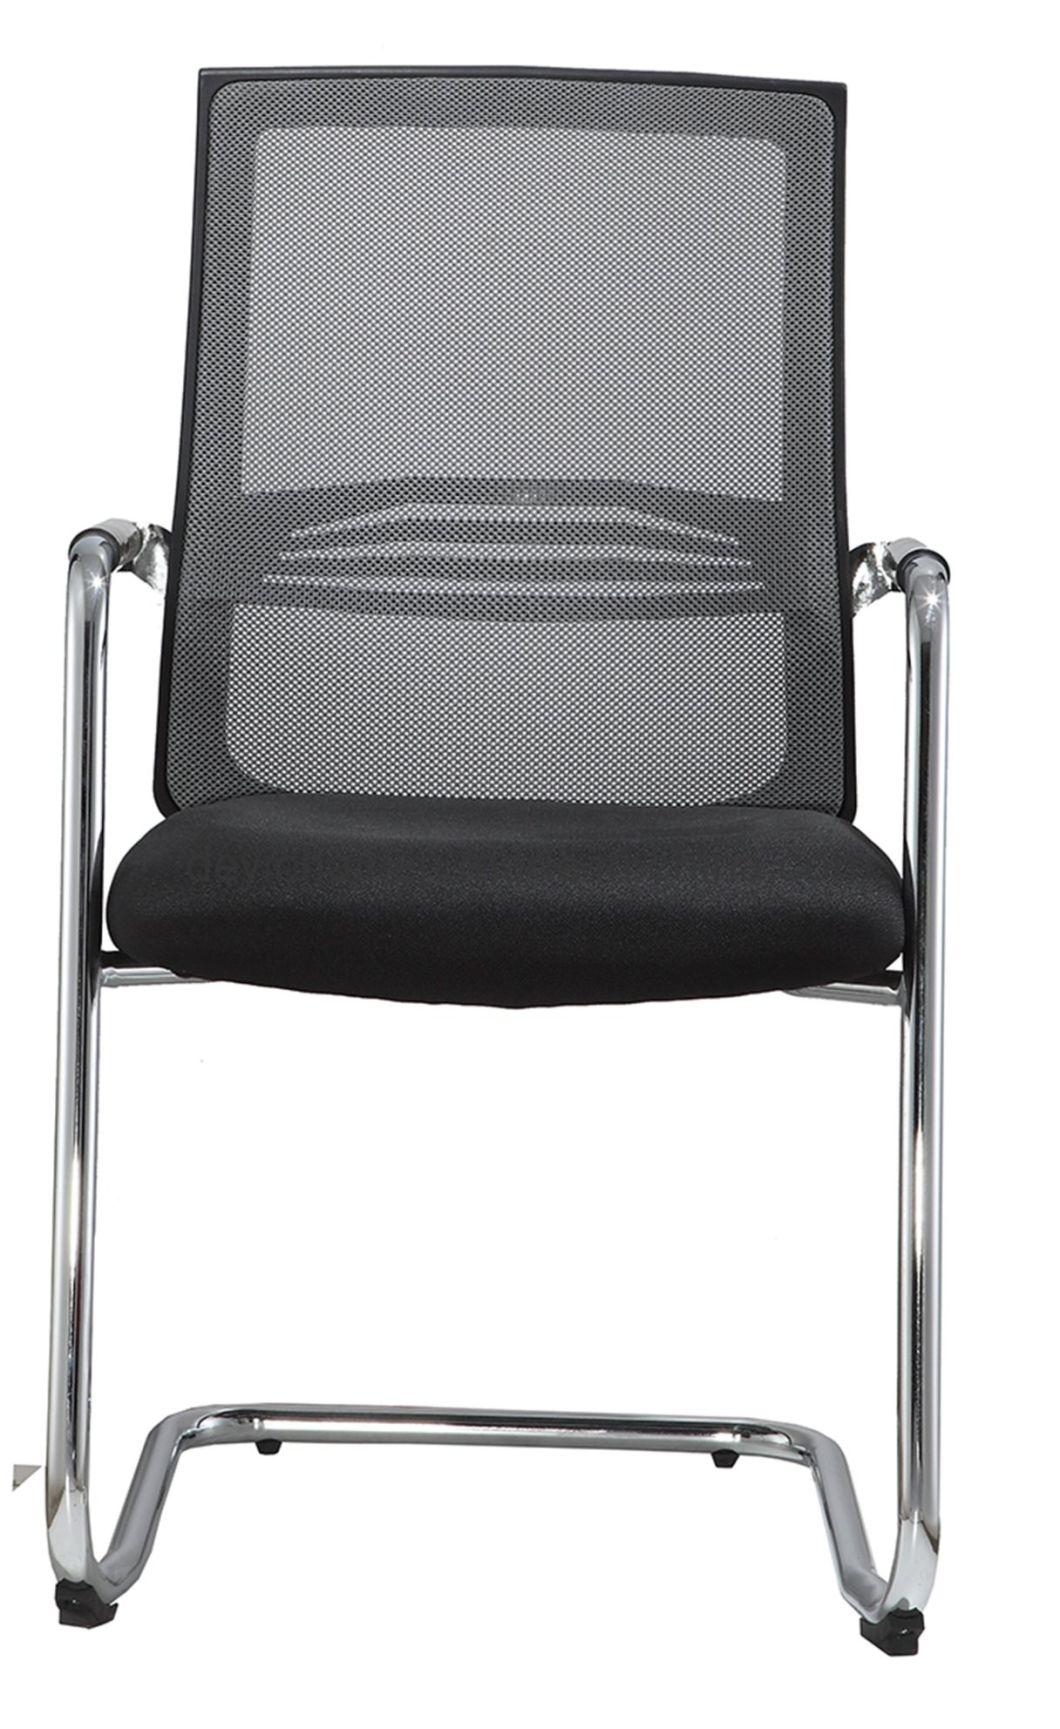 25 Tube 2.0mm Thickness Bow Frame with Armrest High Mesh Back Fabric Seat Conference Chair